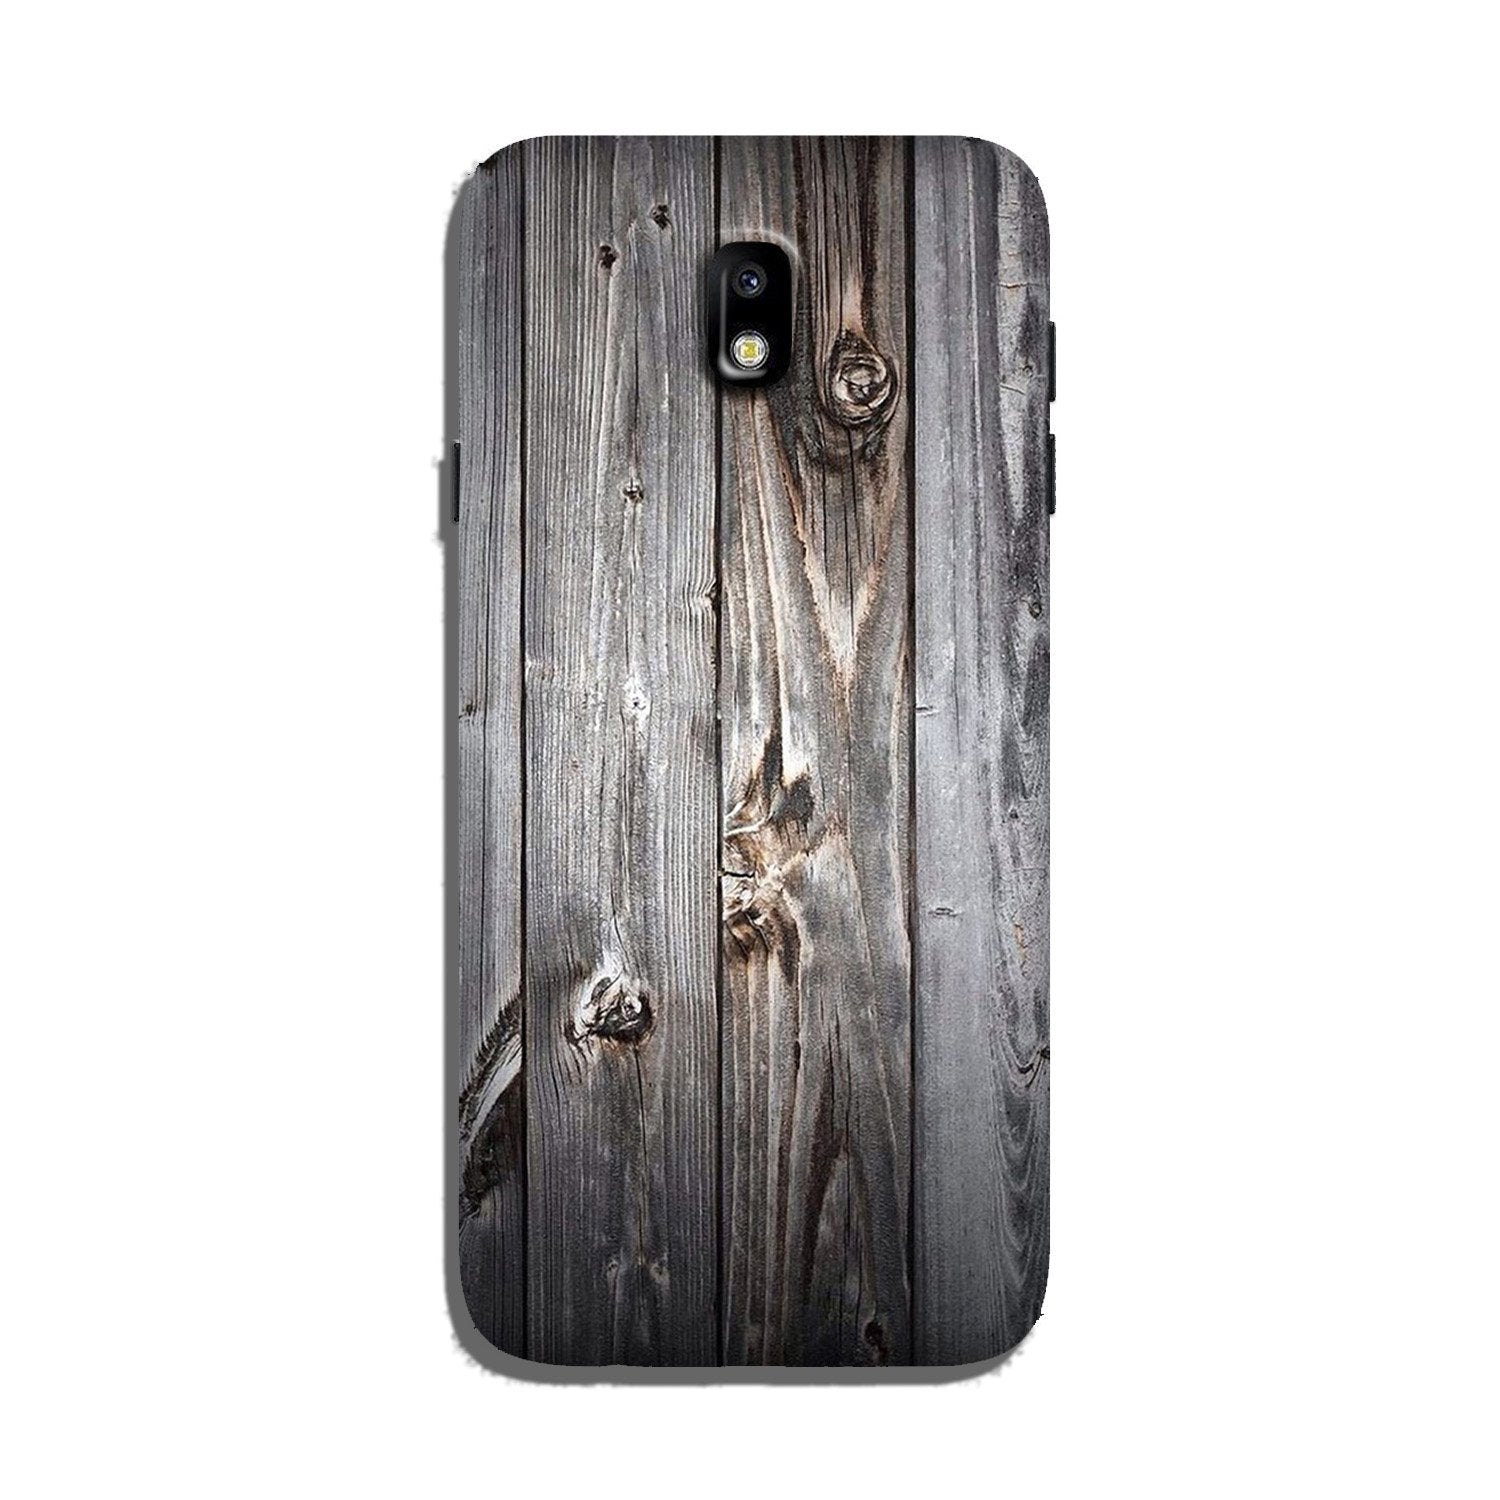 Wooden Look Case for Galaxy J3 Pro  (Design - 114)